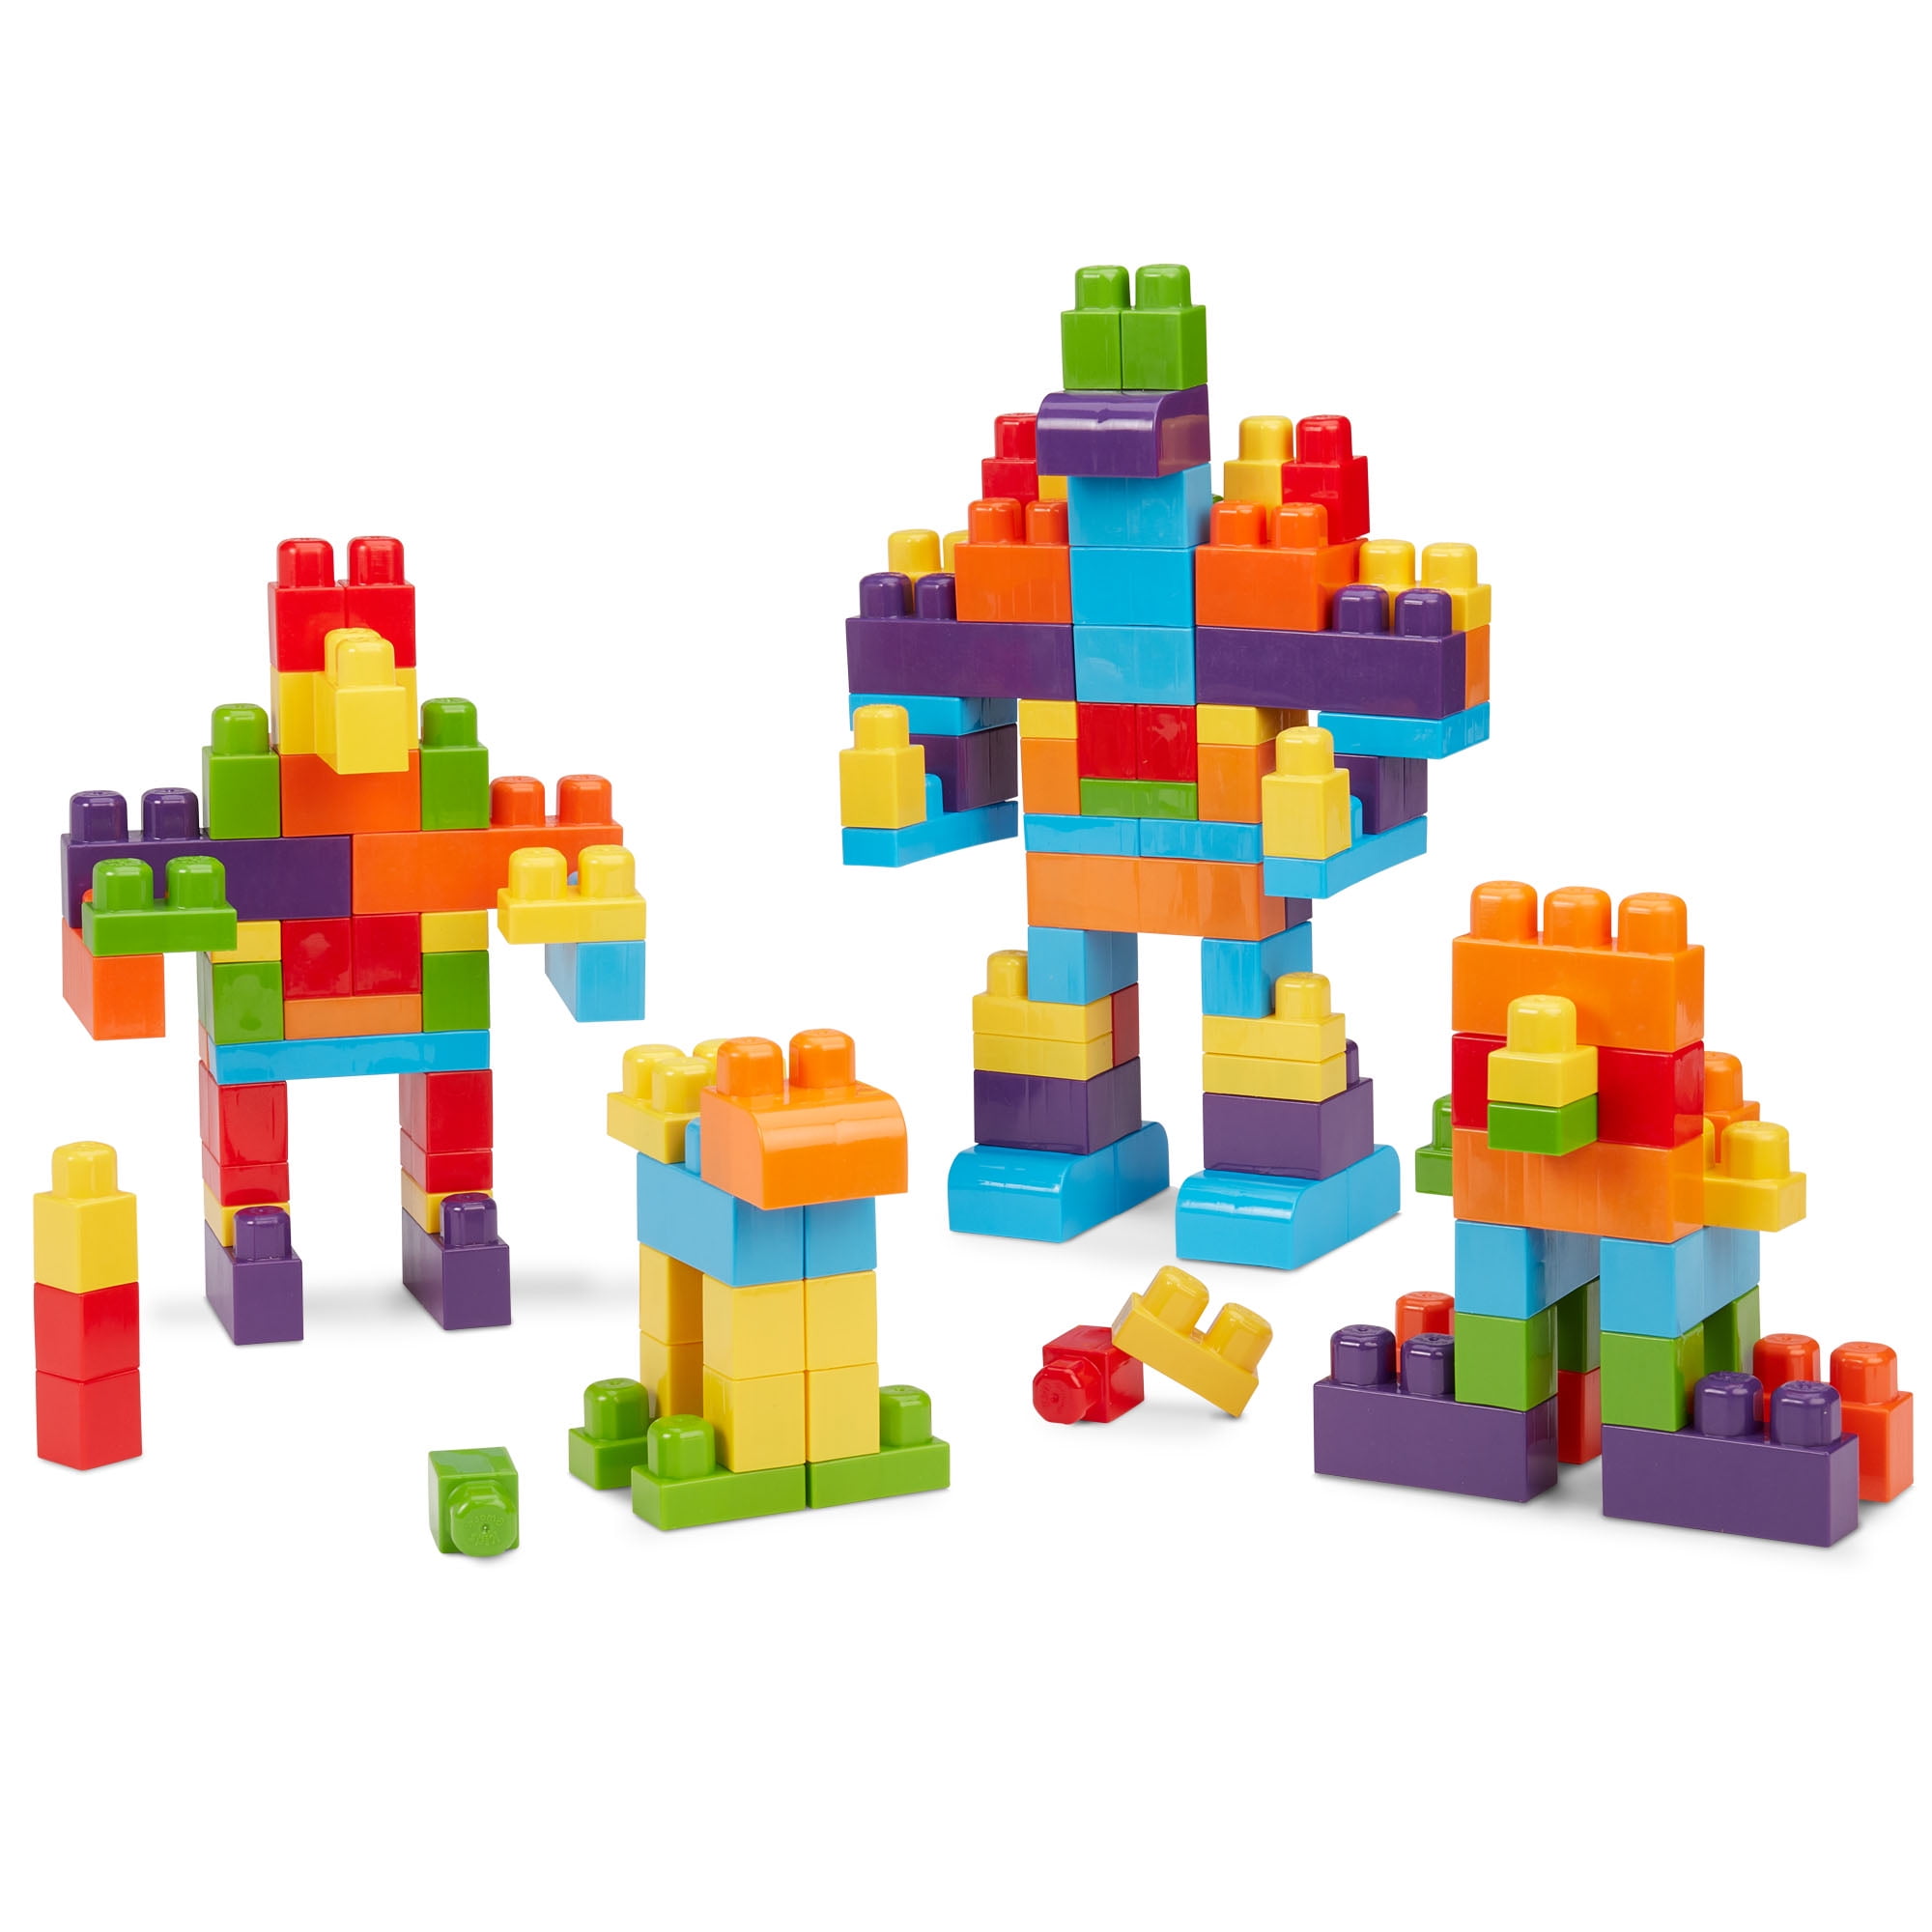 Kids @ Work A Box of Blocks 80 Piece Building Set Compatible with Major Brands 